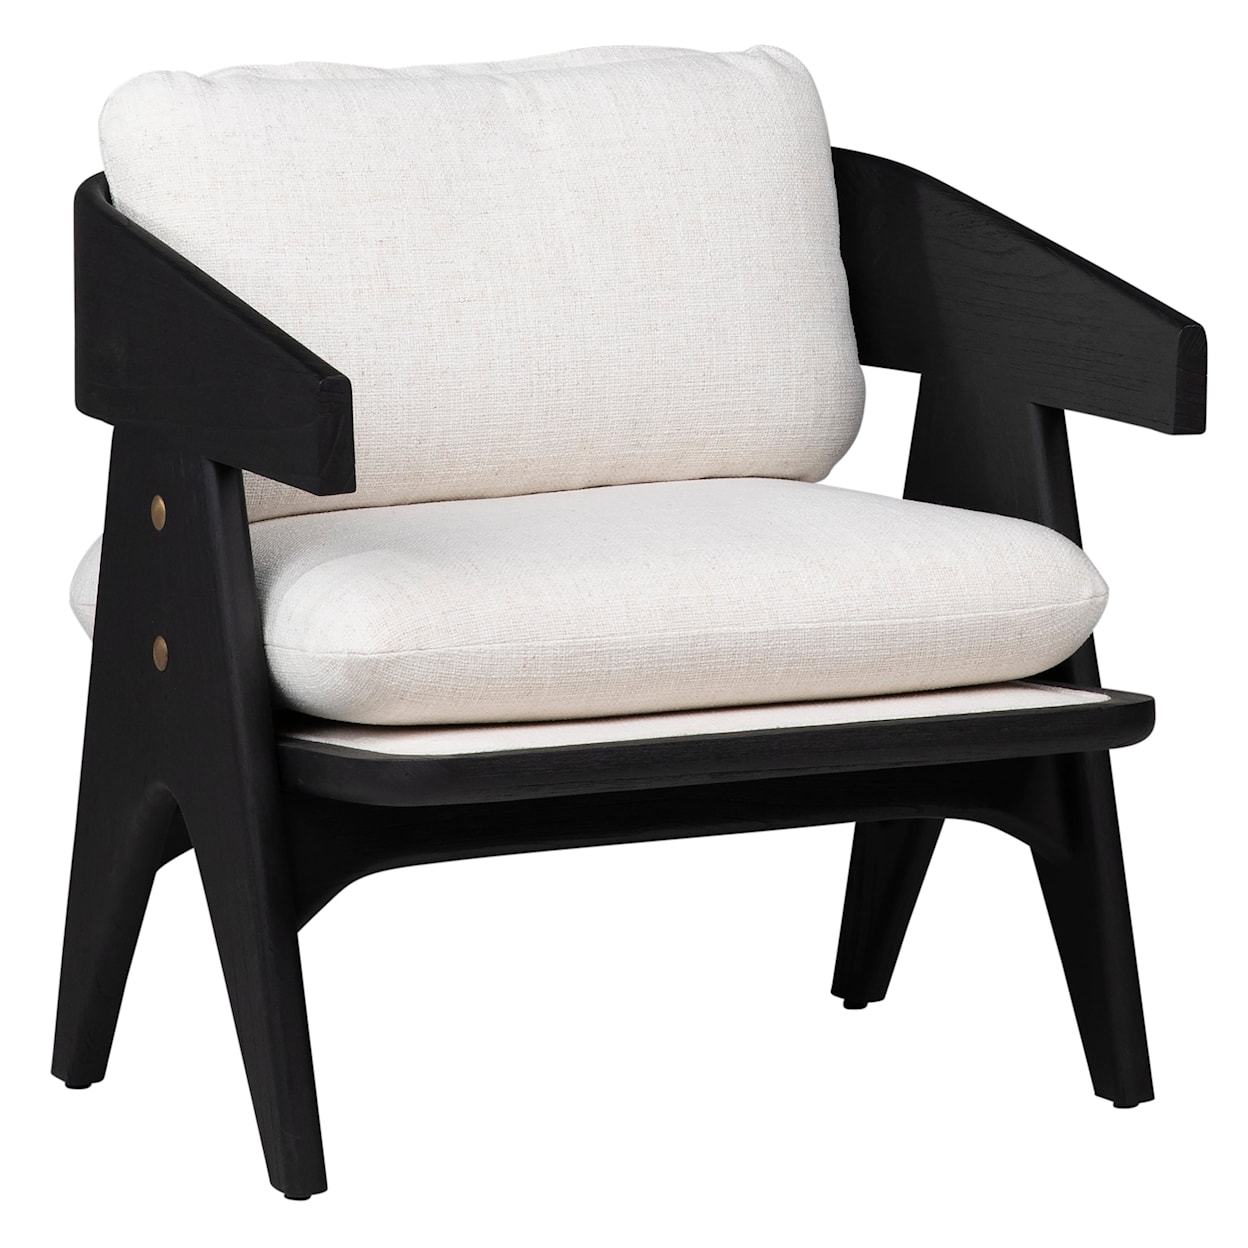 Dovetail Furniture Adelaide Chair